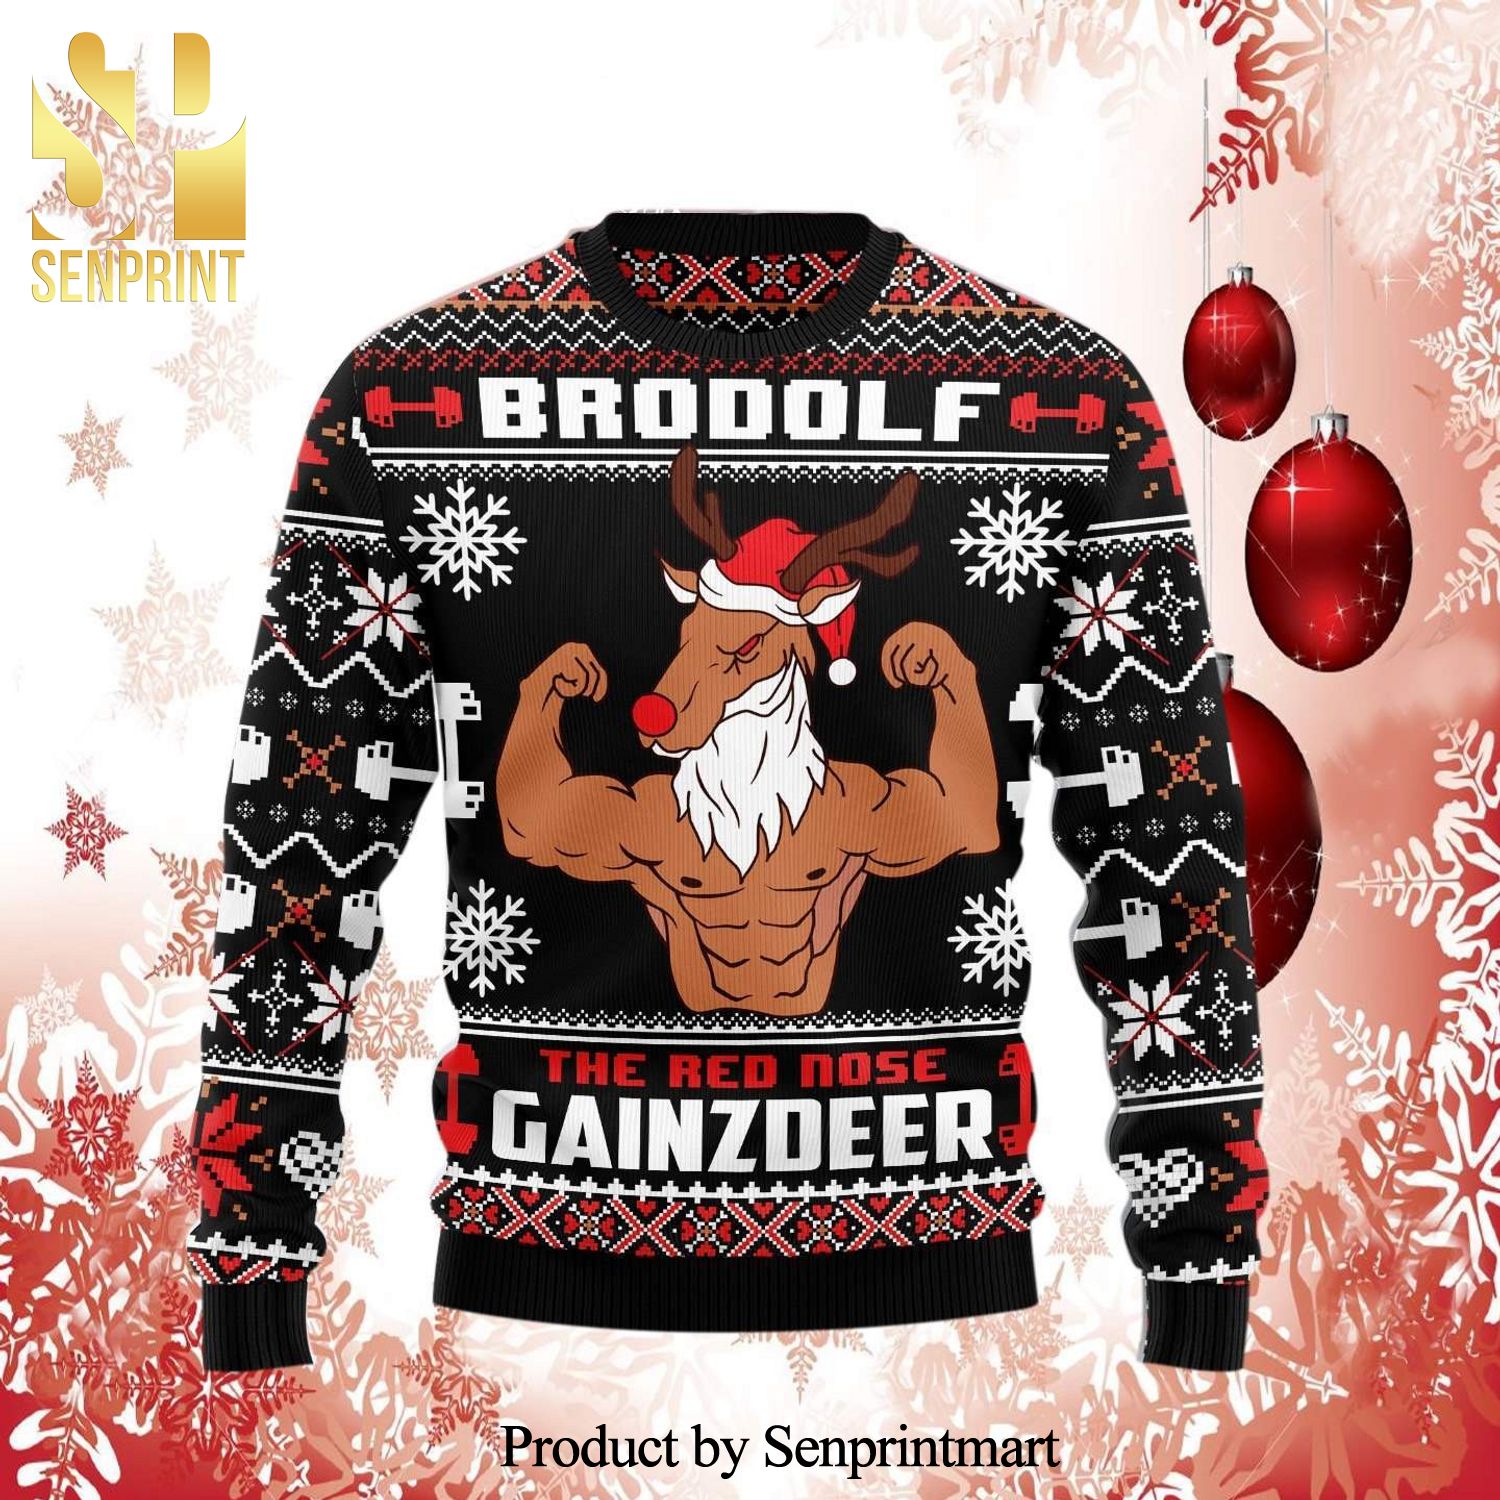 Brodolf The Red Nose Gainzdeer Gym Knitted Ugly Christmas Sweater